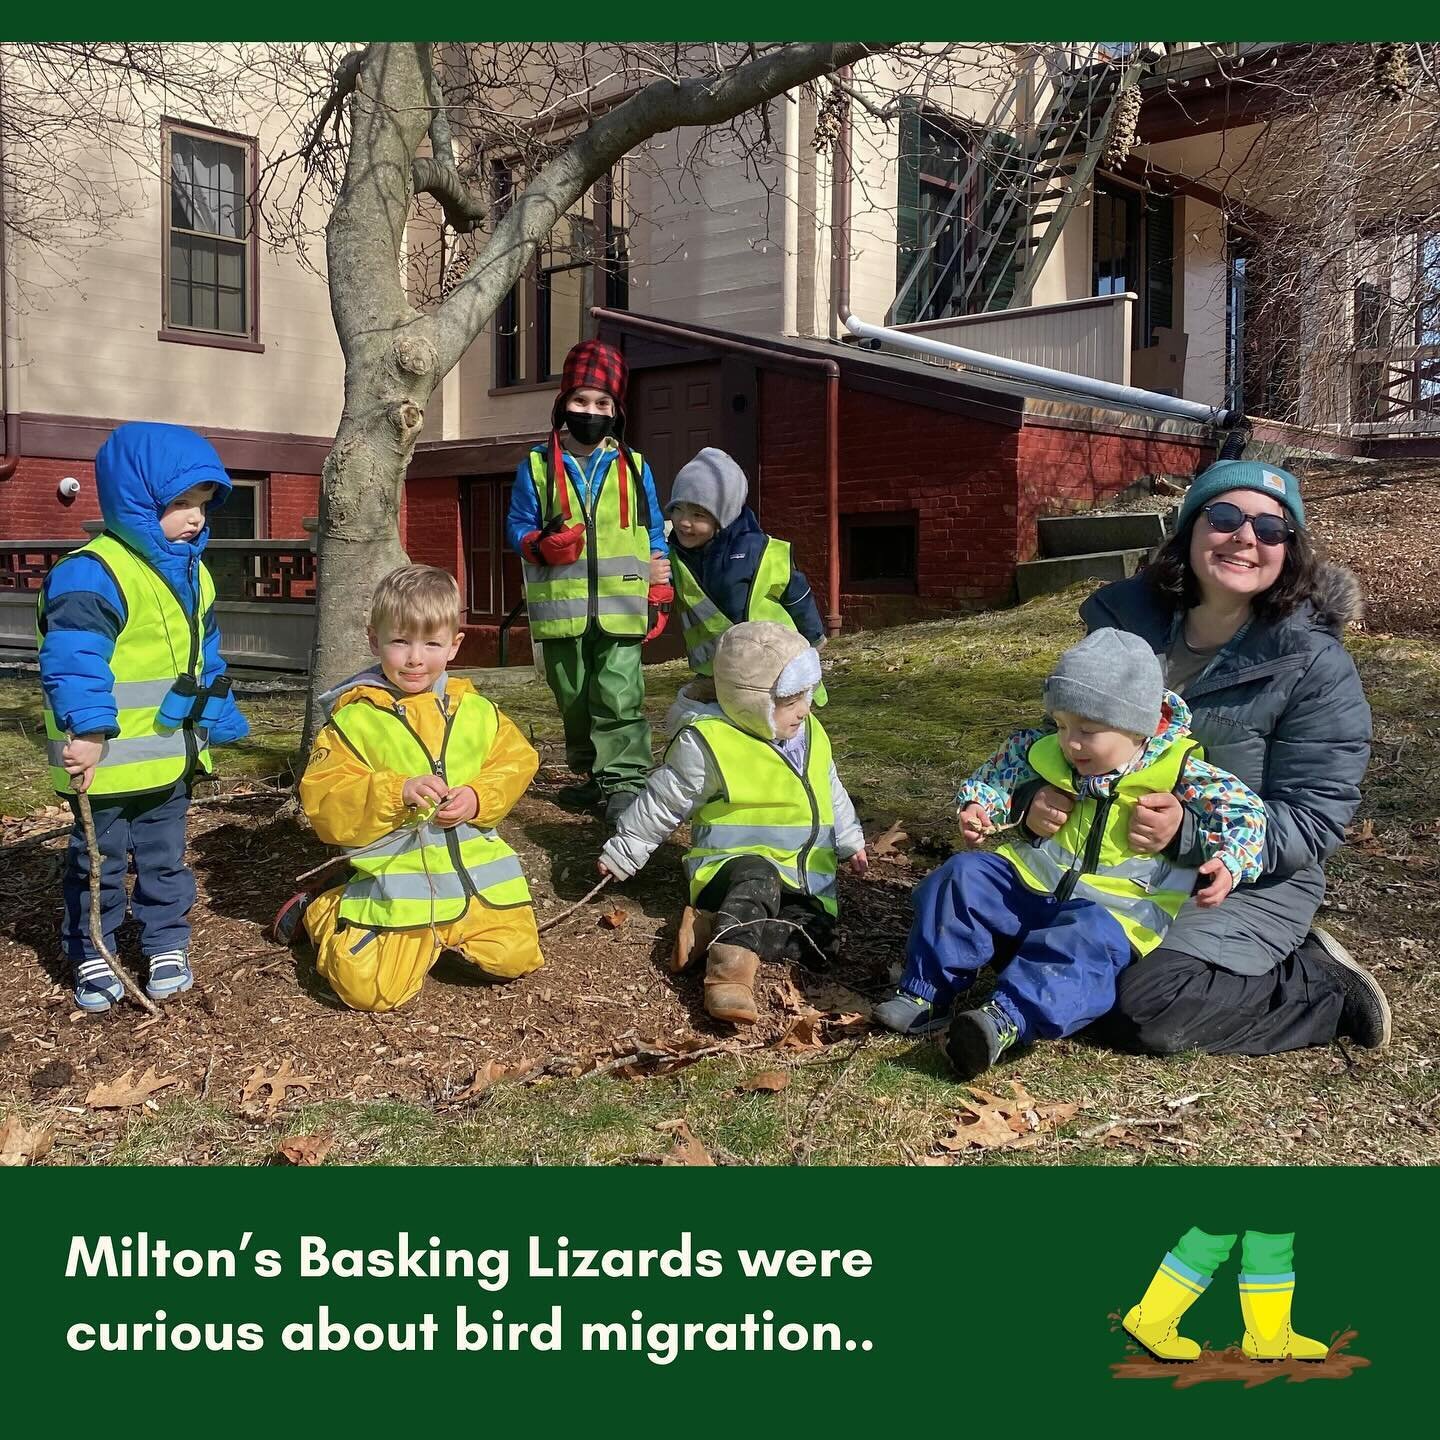 The Milton Basking Lizards have been busy crafting bird feeders at the Forbes House! At BOPN, our child-led curriculum empowers young learners to explore their interests freely. Are you considering a nature-based preschool for your child? BOPN has ex